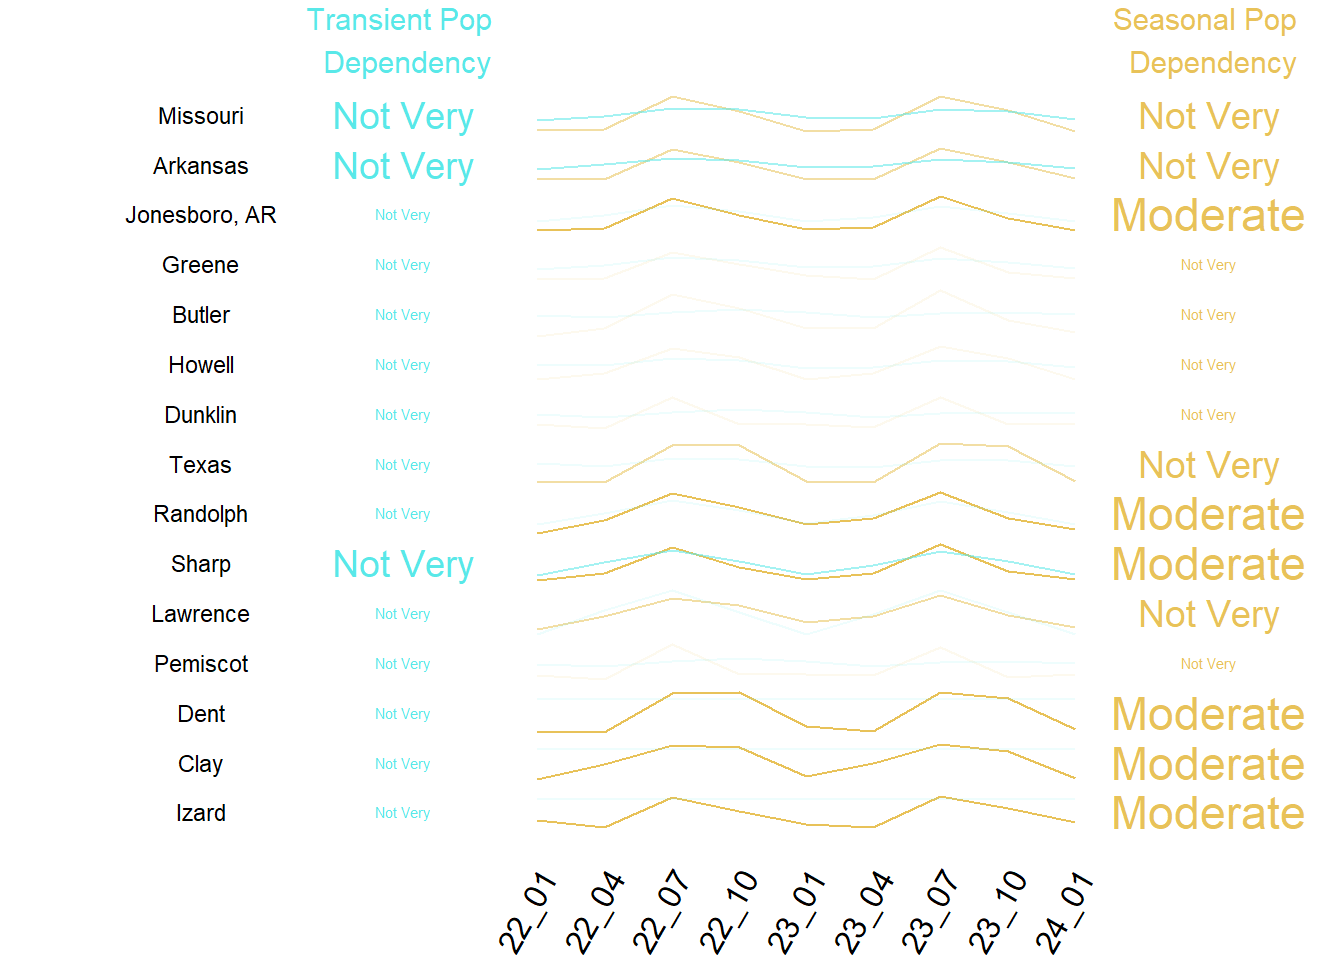 Summary of Transient and Seasonal Pop by County